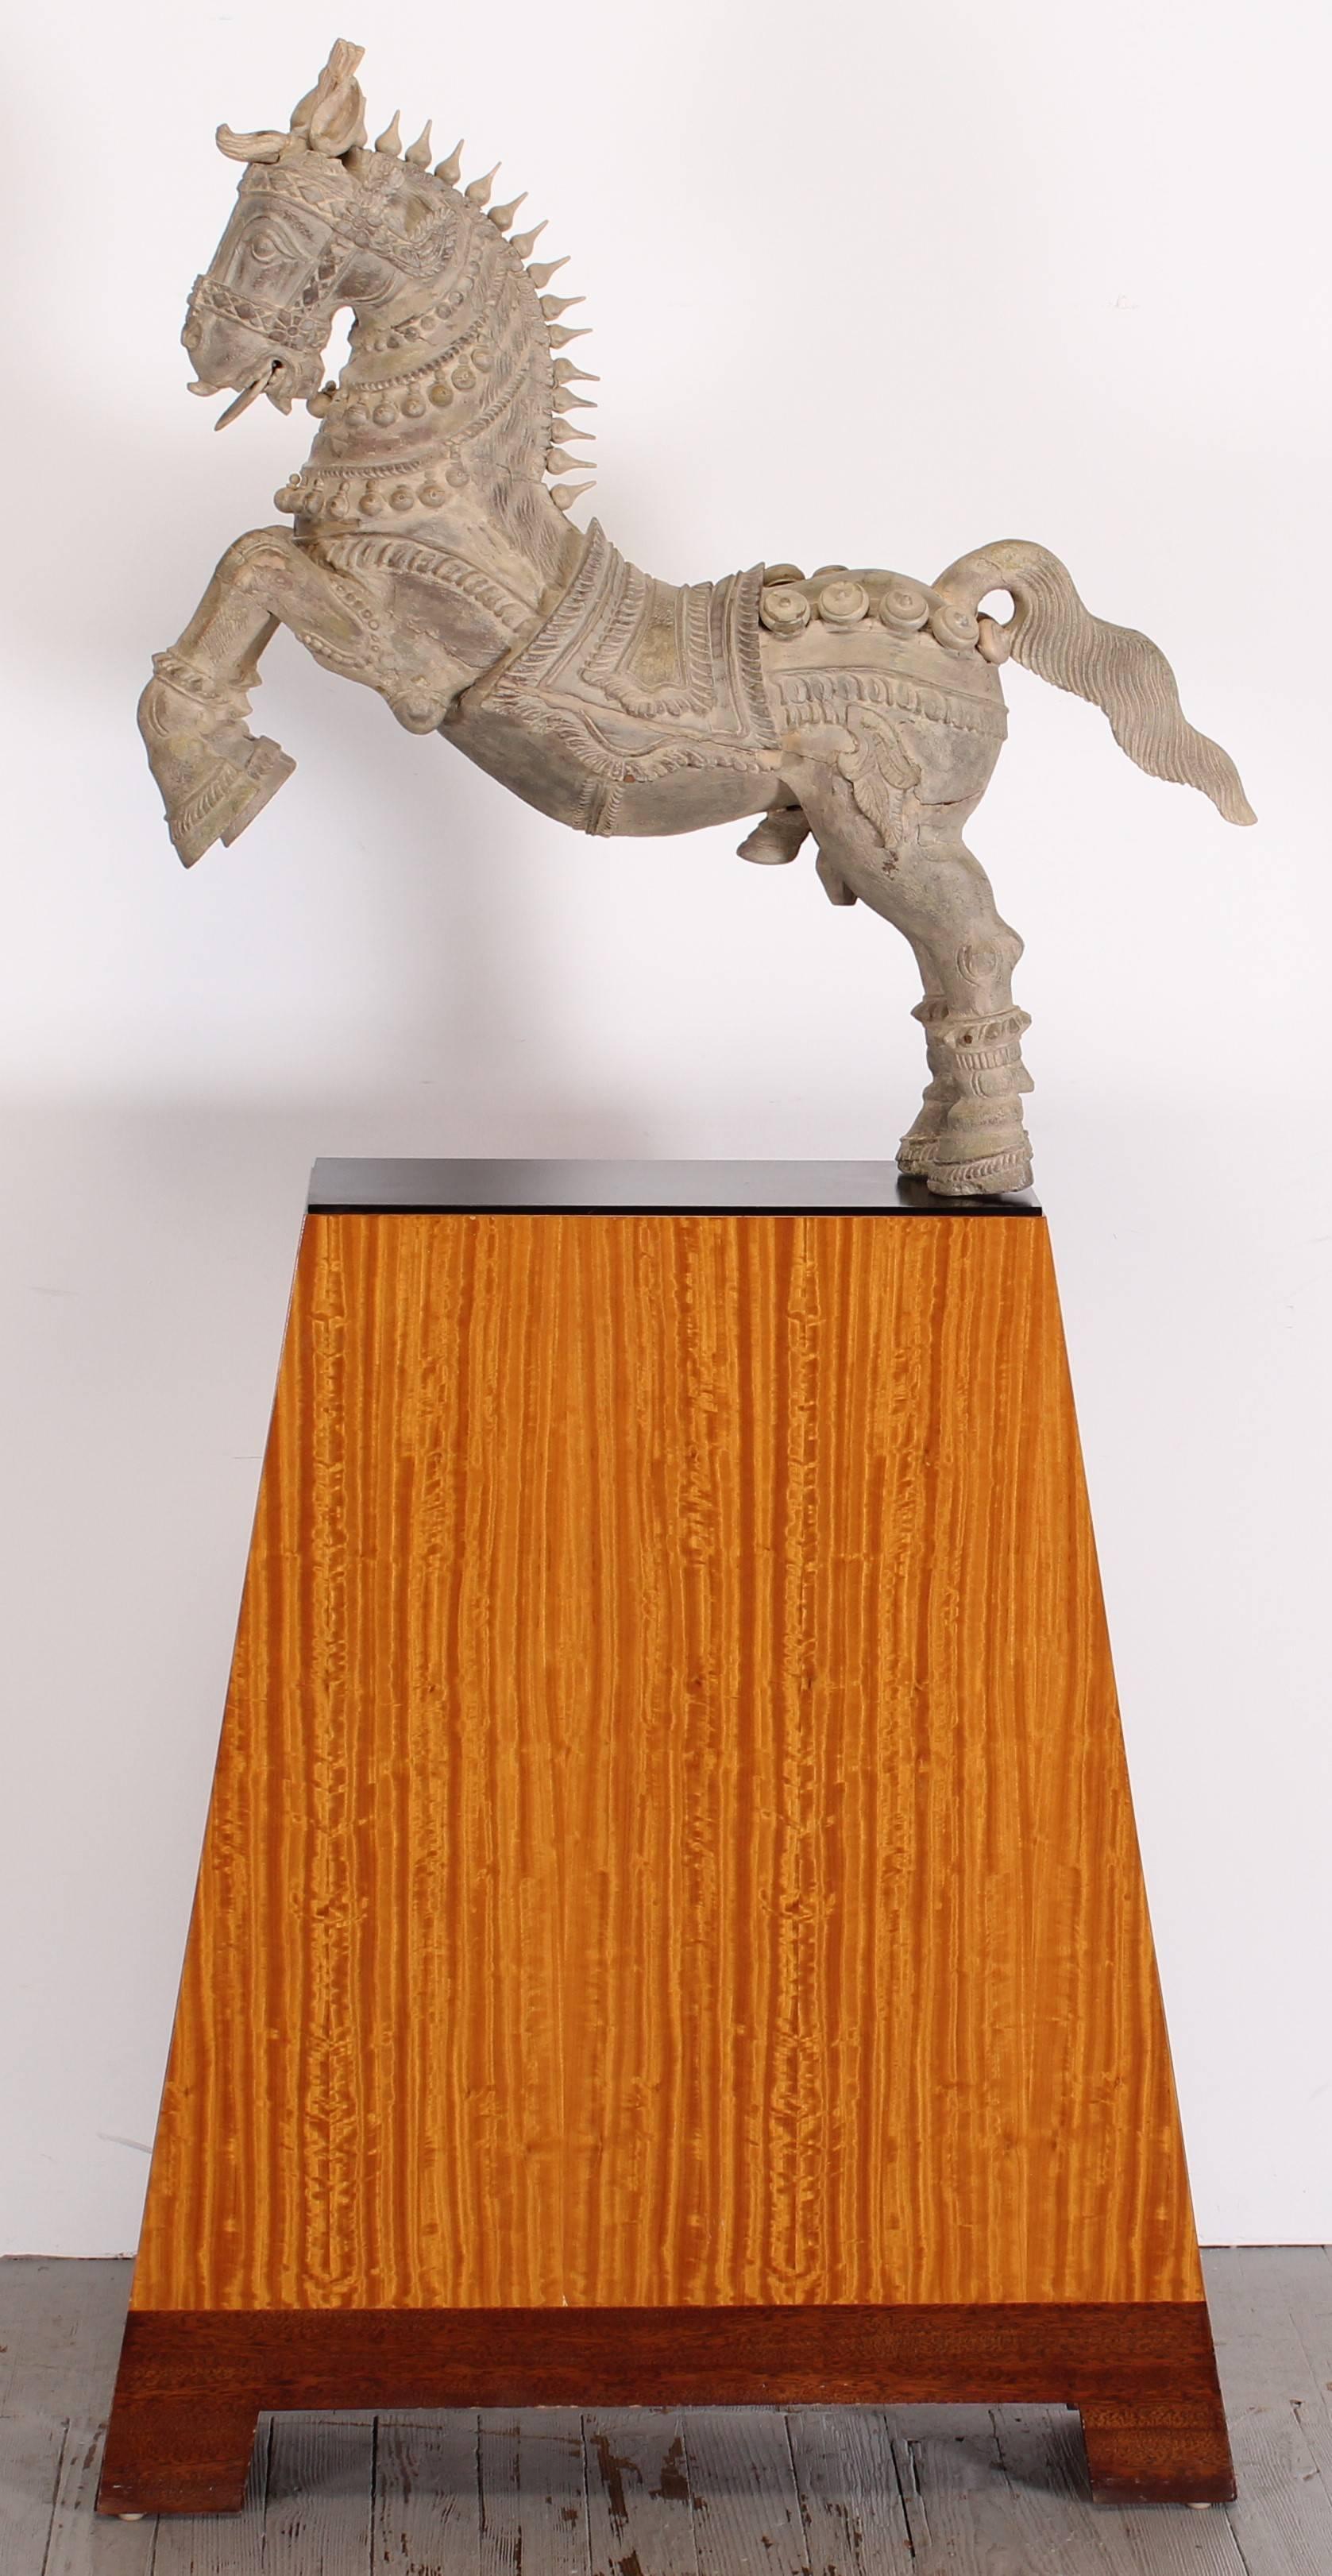 This carved wood horse has typical characteristics of vahana wood carvings made in India. It was probably made in the late 20th century, to replicate a much older piece. The horse sculpture, the metal base plate and the pedestal, separate to